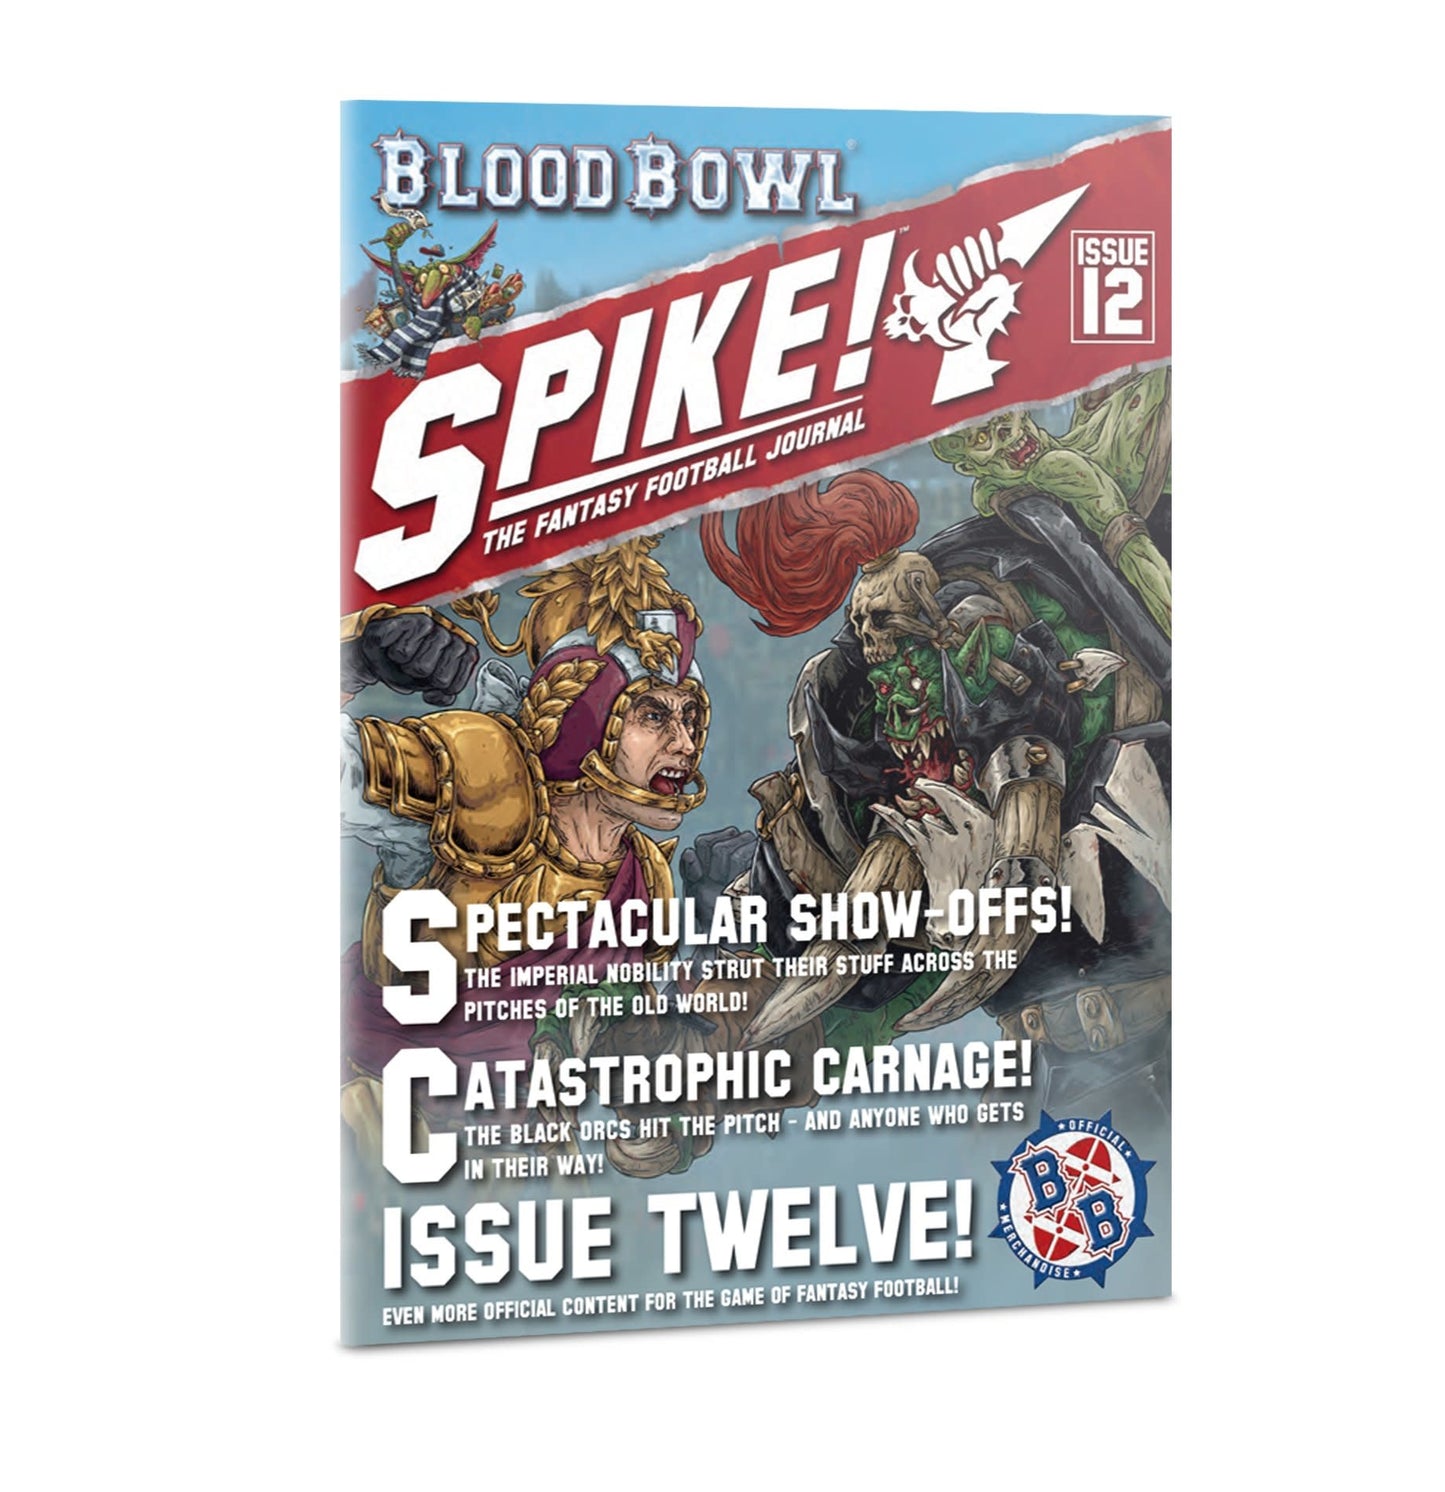 Blood Bowl: Spike! Journal Issue 12 - Blood Bowl - The Hooded Goblin